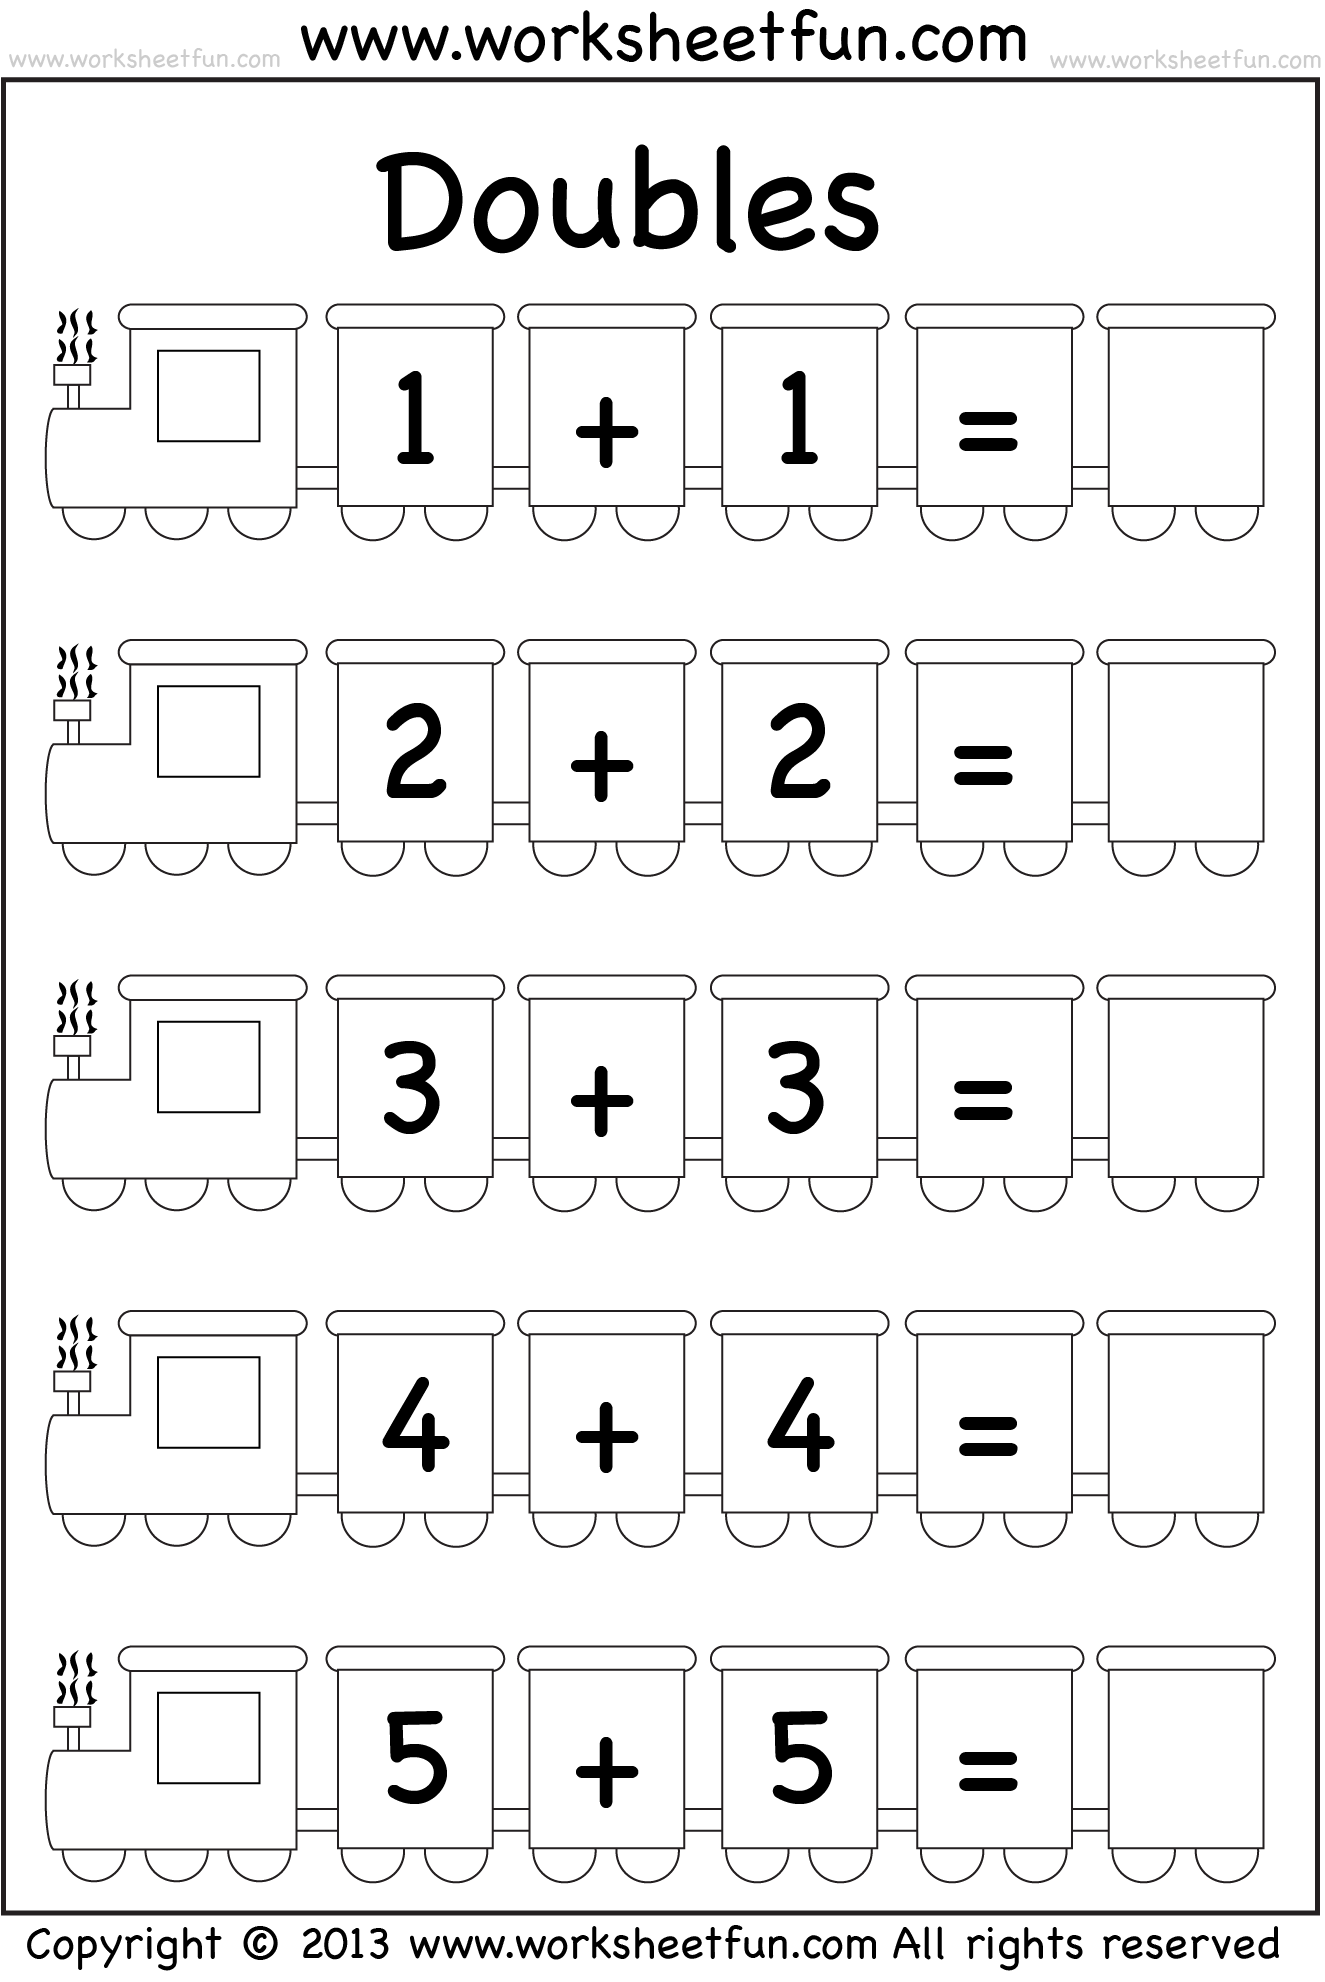 Addition Doubles – 11 Worksheet / FREE Printable Worksheets For Doubles Plus One Worksheet